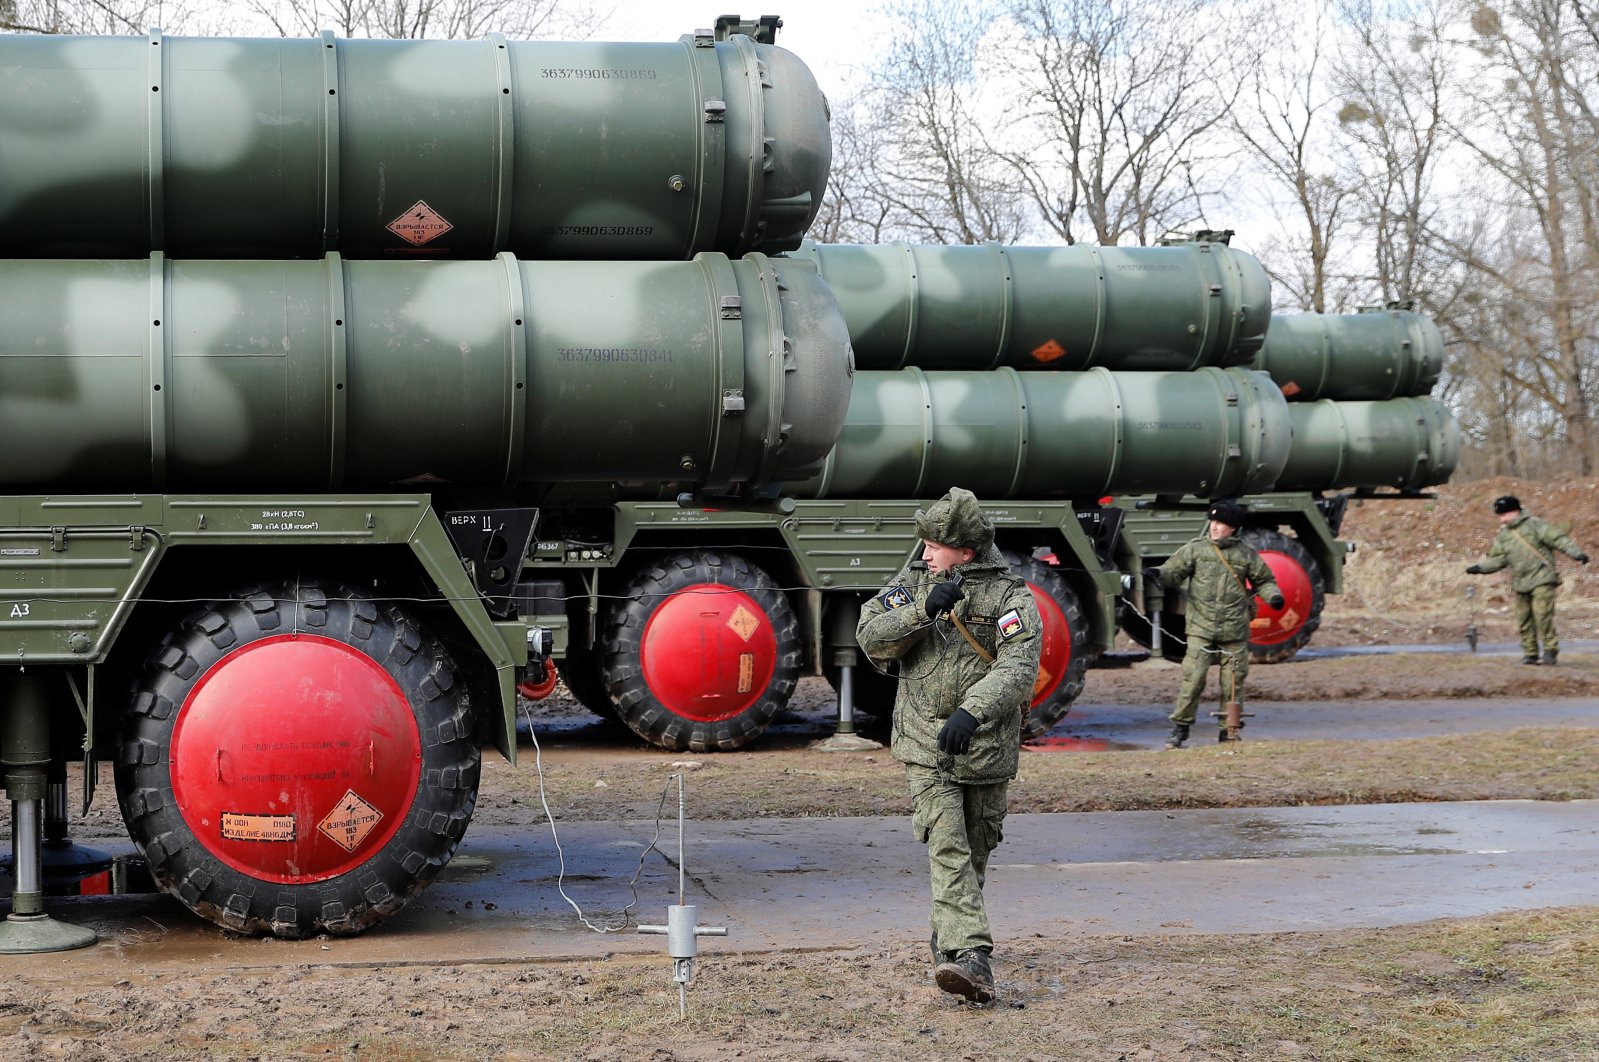 Russian servicemen stand next to a new S-400 surface-to-air missile system after its deployment at a military base outside the town of Gvardeysk near Kaliningrad, Russia on March 11, 2019. (Reuters Photo)